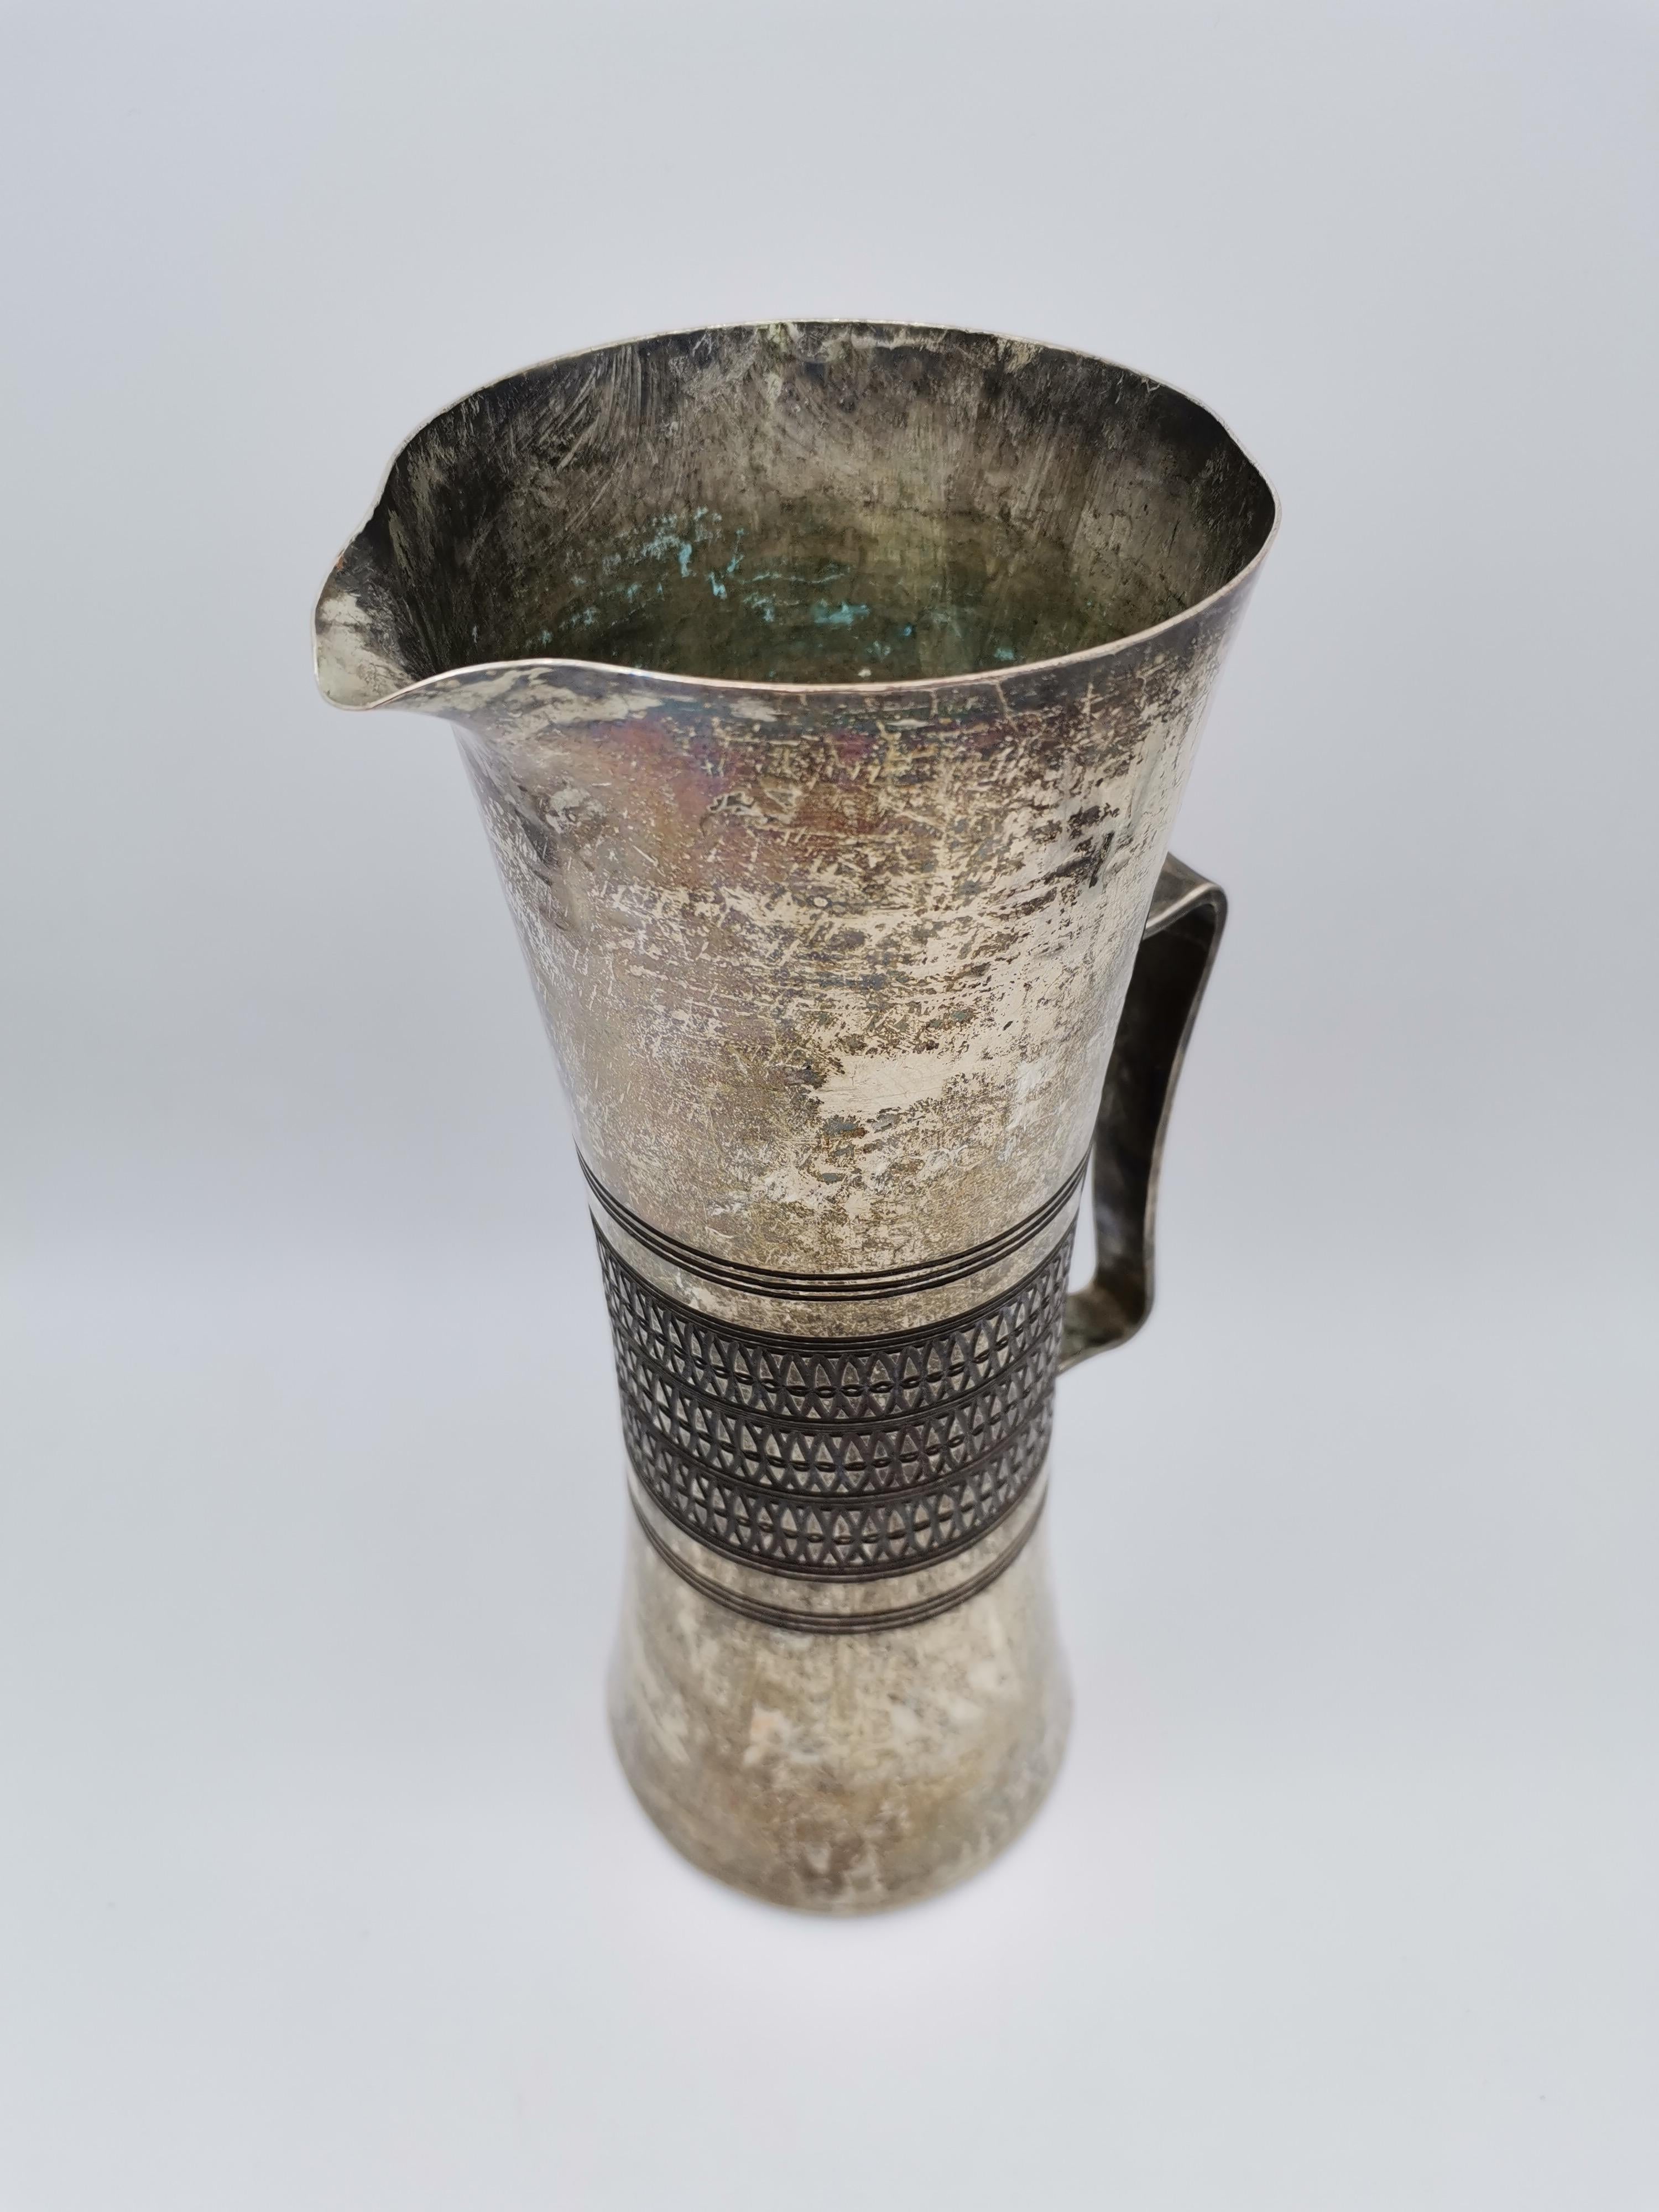 A carafe made of silvered metal hammered by Zanetto.